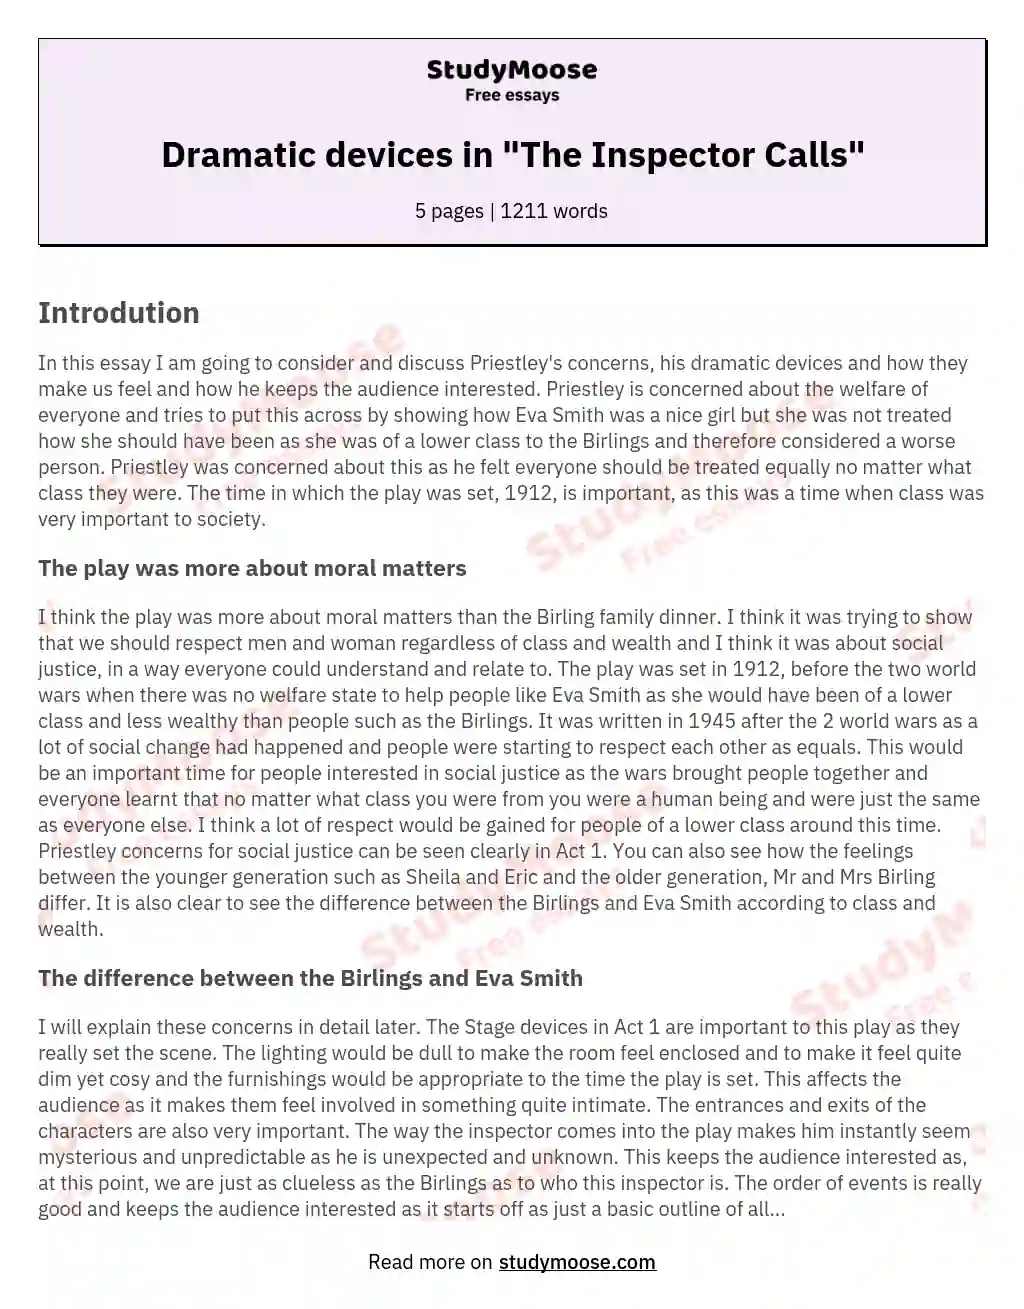 Dramatic devices in "The Inspector Calls"